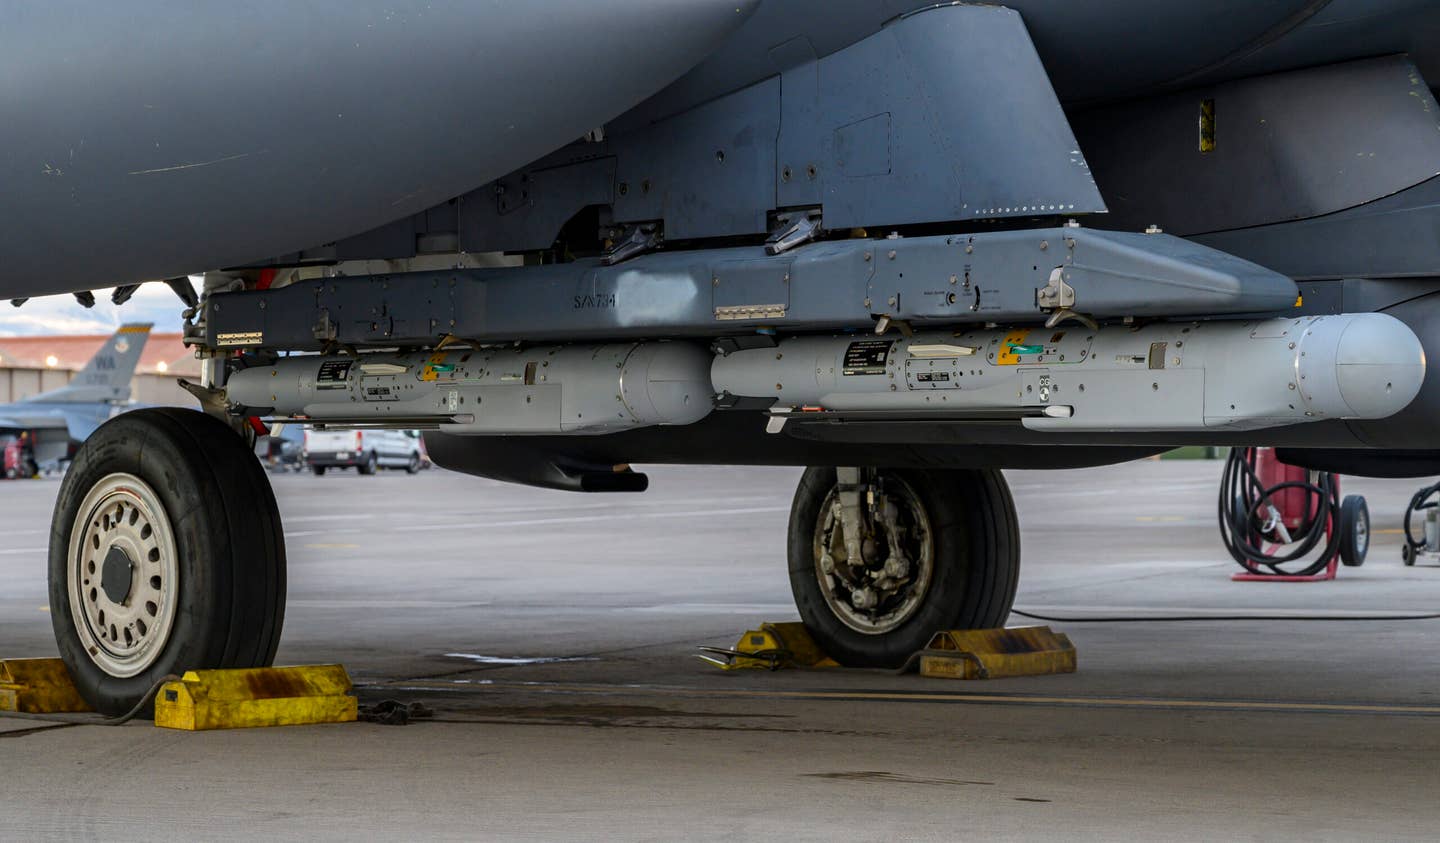 A U.S. Air Force F-15E Strike Eagle from the 422nd Test and Evaluation Squadron carrying GBU-53/B StormBreaker munitions. <em>U.S. Air Force photo by William Lewis</em><br>